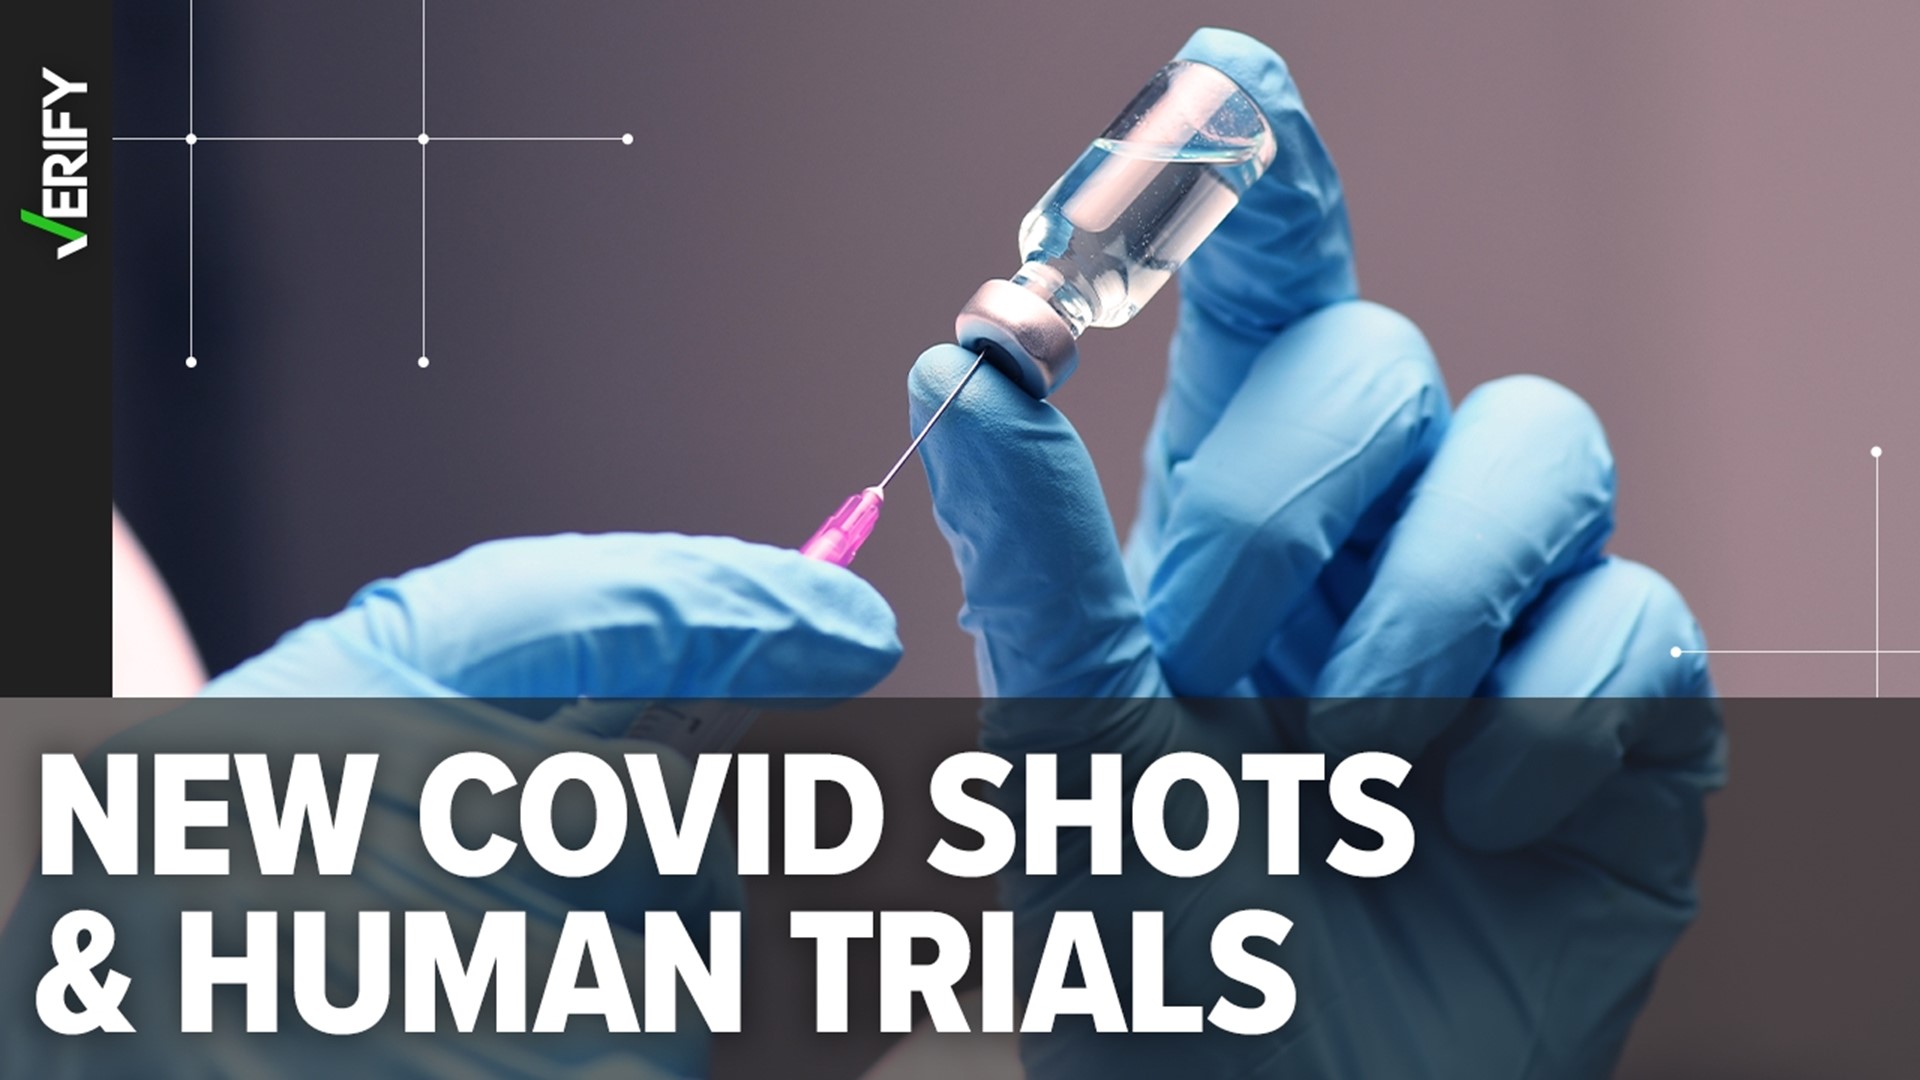 The Florida Surgeon General misleadingly claimed there are no human trials for the new mRNA COVID XBB boosters. Here’s how the manufacturers tested them.